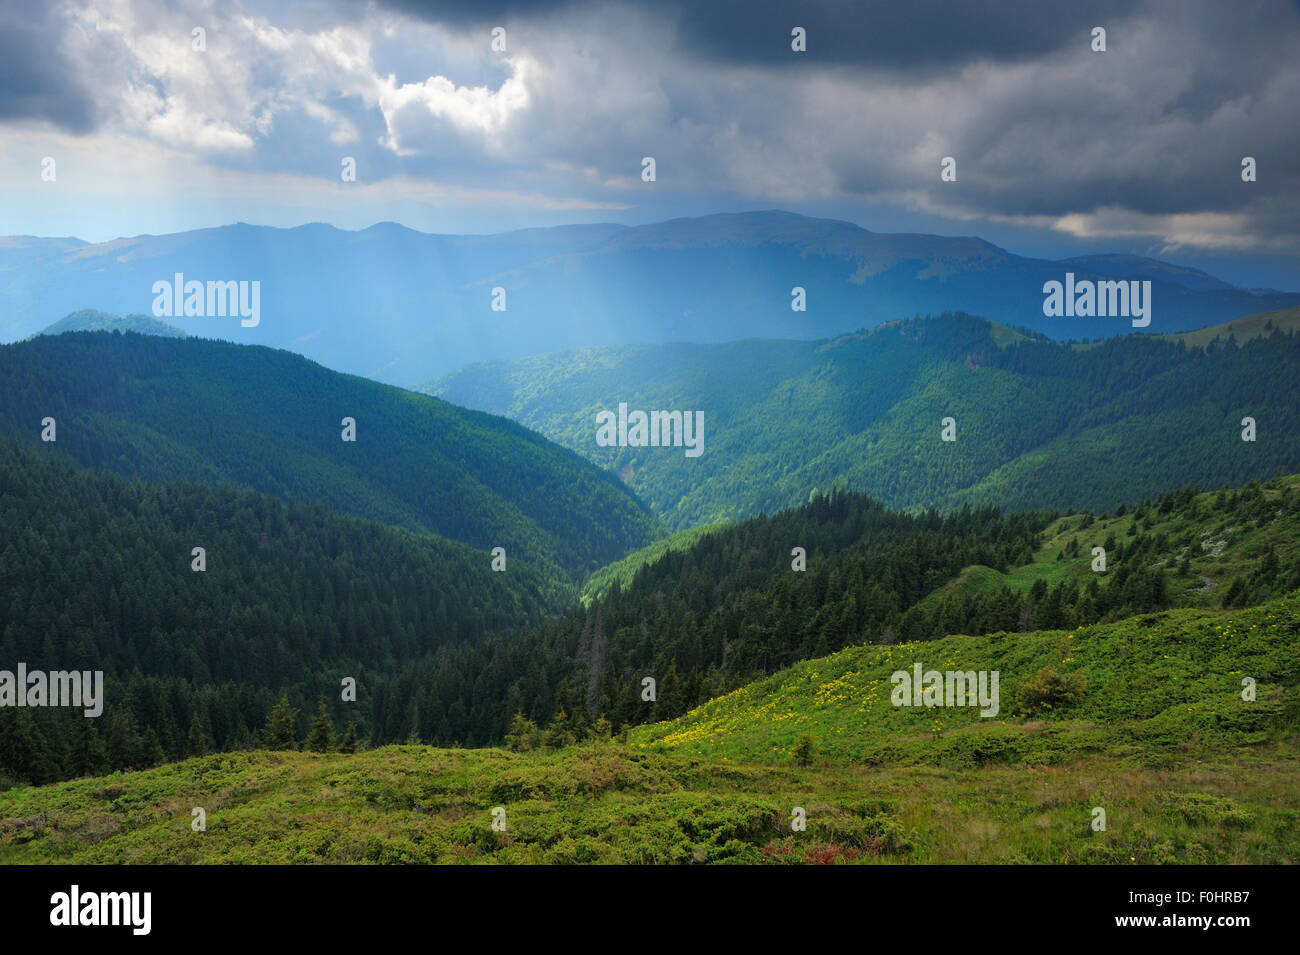 Rays of sunlight shining on alpine grasslands and view of tree line, Leota mountain range, Arges county, Carpathian Mountains, Romania, July, 2011 Stock Photo